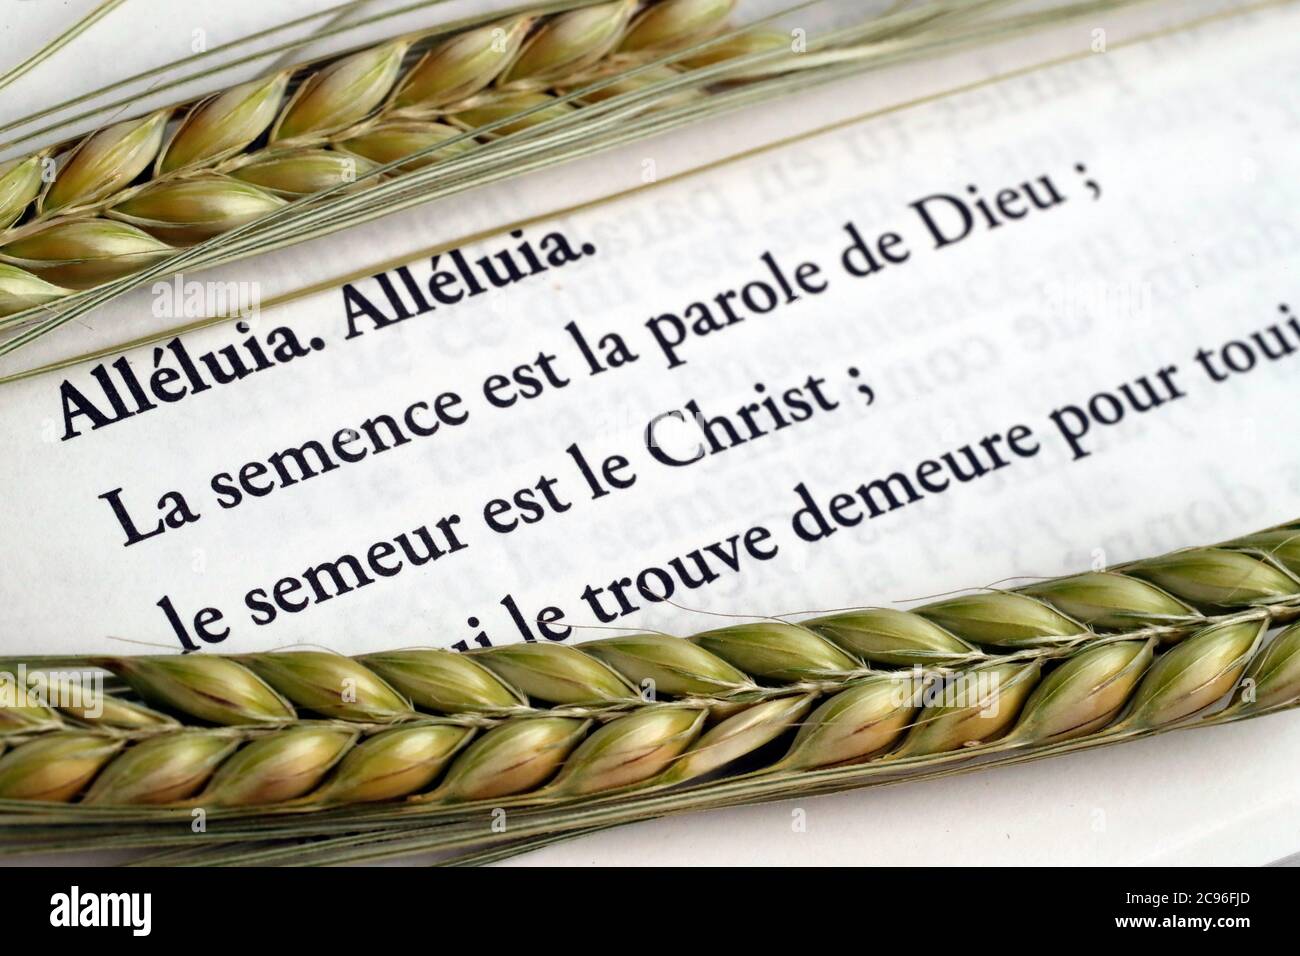 The sacred book of the Bible and ears of wheat as a symbol of spiritual and physical food.  The Parable of the Sower.  France. Stock Photo